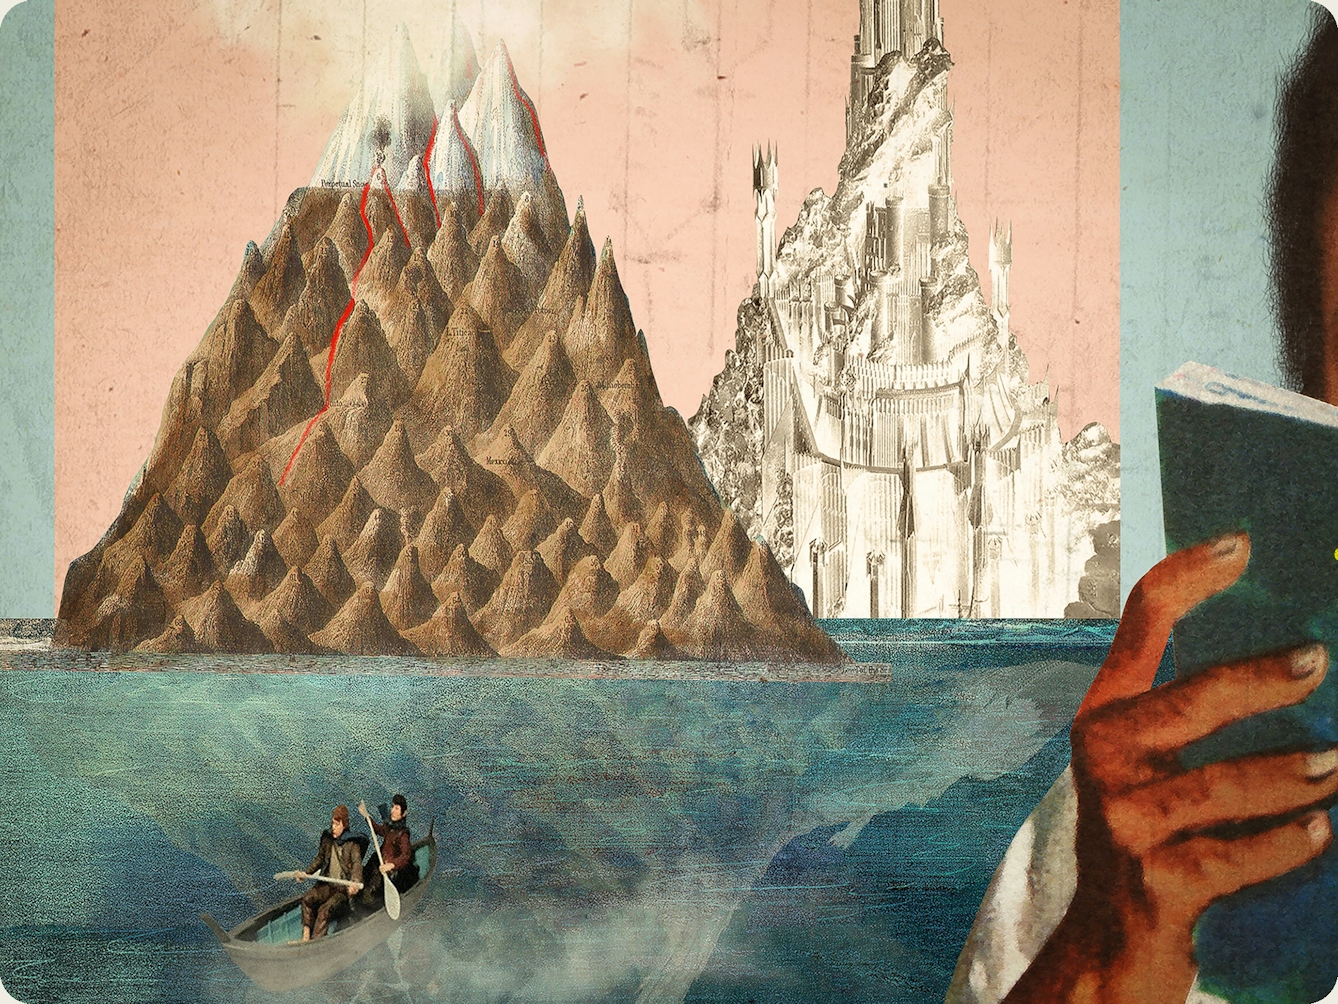 Detail from a larger mixed media digital artwork combining found imagery from vintage magazines and books with painted and textured elements. The overall hues are pastel blues, pinks and greys with elements of harsh reds and greens. The artwork shows a seascape with 2 large mountains on the horizon, one is a representation of the eye of Sauron from Lord of the Rings. In the ocean below is a small row boat containing two characters holding paddles. These characters resemble Frodo and Sam, also from Lord of the Rings.